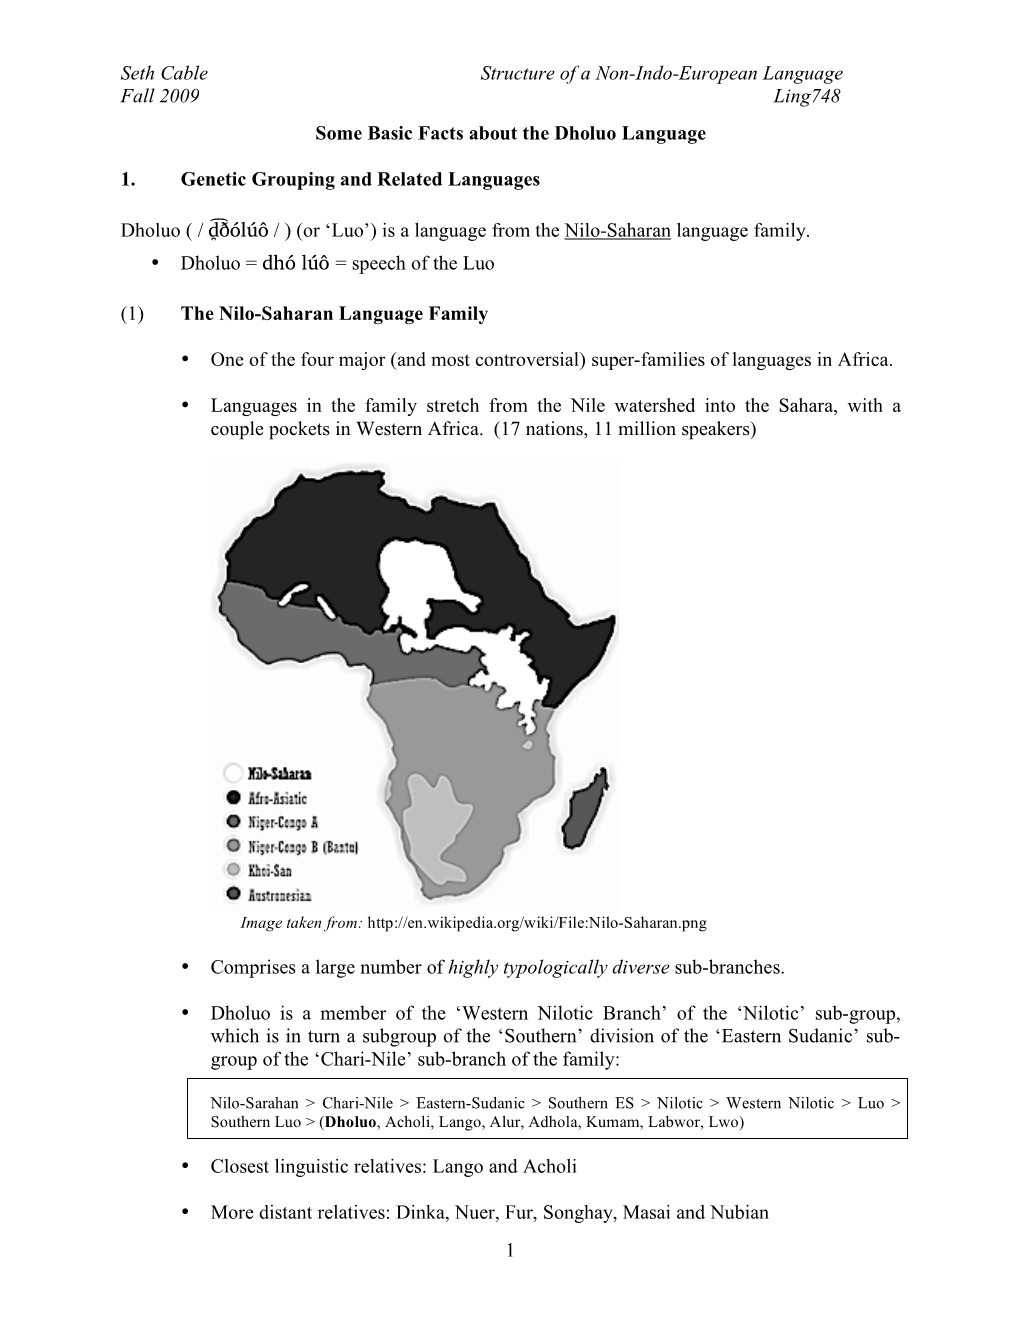 Some Basic Facts About the Dholuo Language